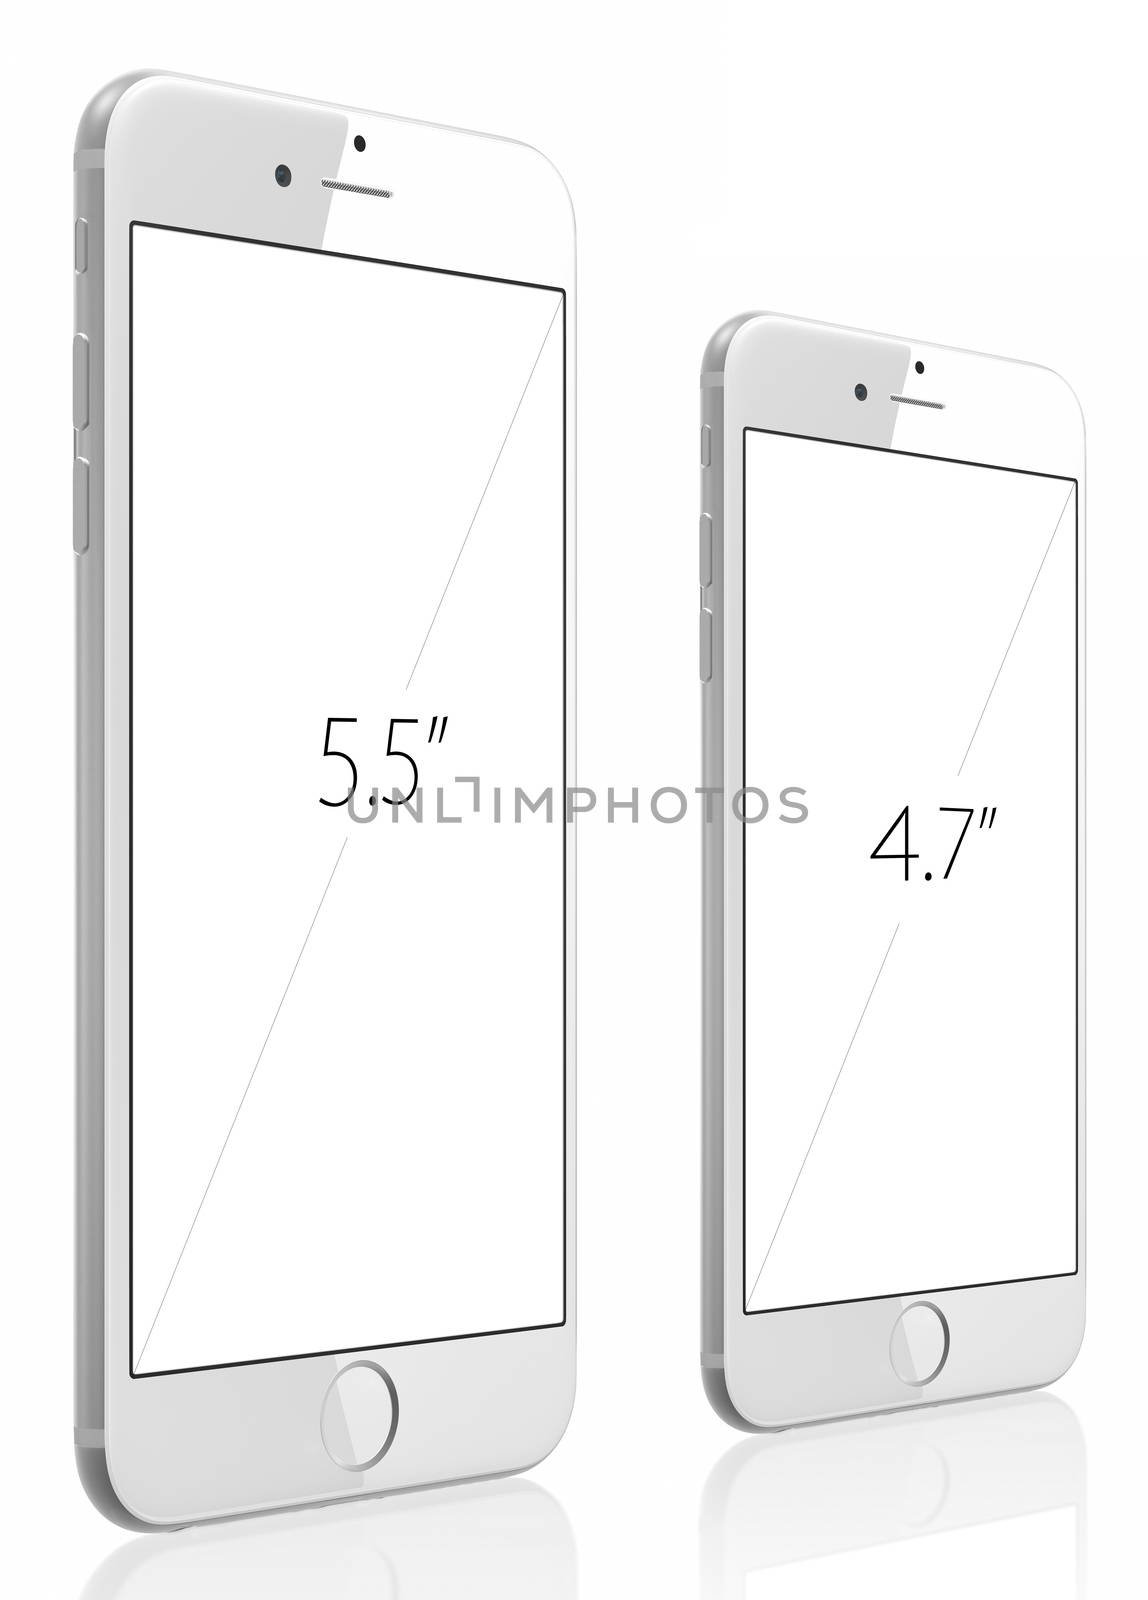 Galati, Romania - September 18, 2014: Apple Silver iPhone 6 Plus and iPhone 6 witn blank screen.The new iPhone with higher-resolution 4.7 and 5.5-inch screens, improved cameras, new sensors, a dedicated NFC chip for mobile payments. Apple released the iPhone 6 and iPhone 6 Plus on September 9, 2014.